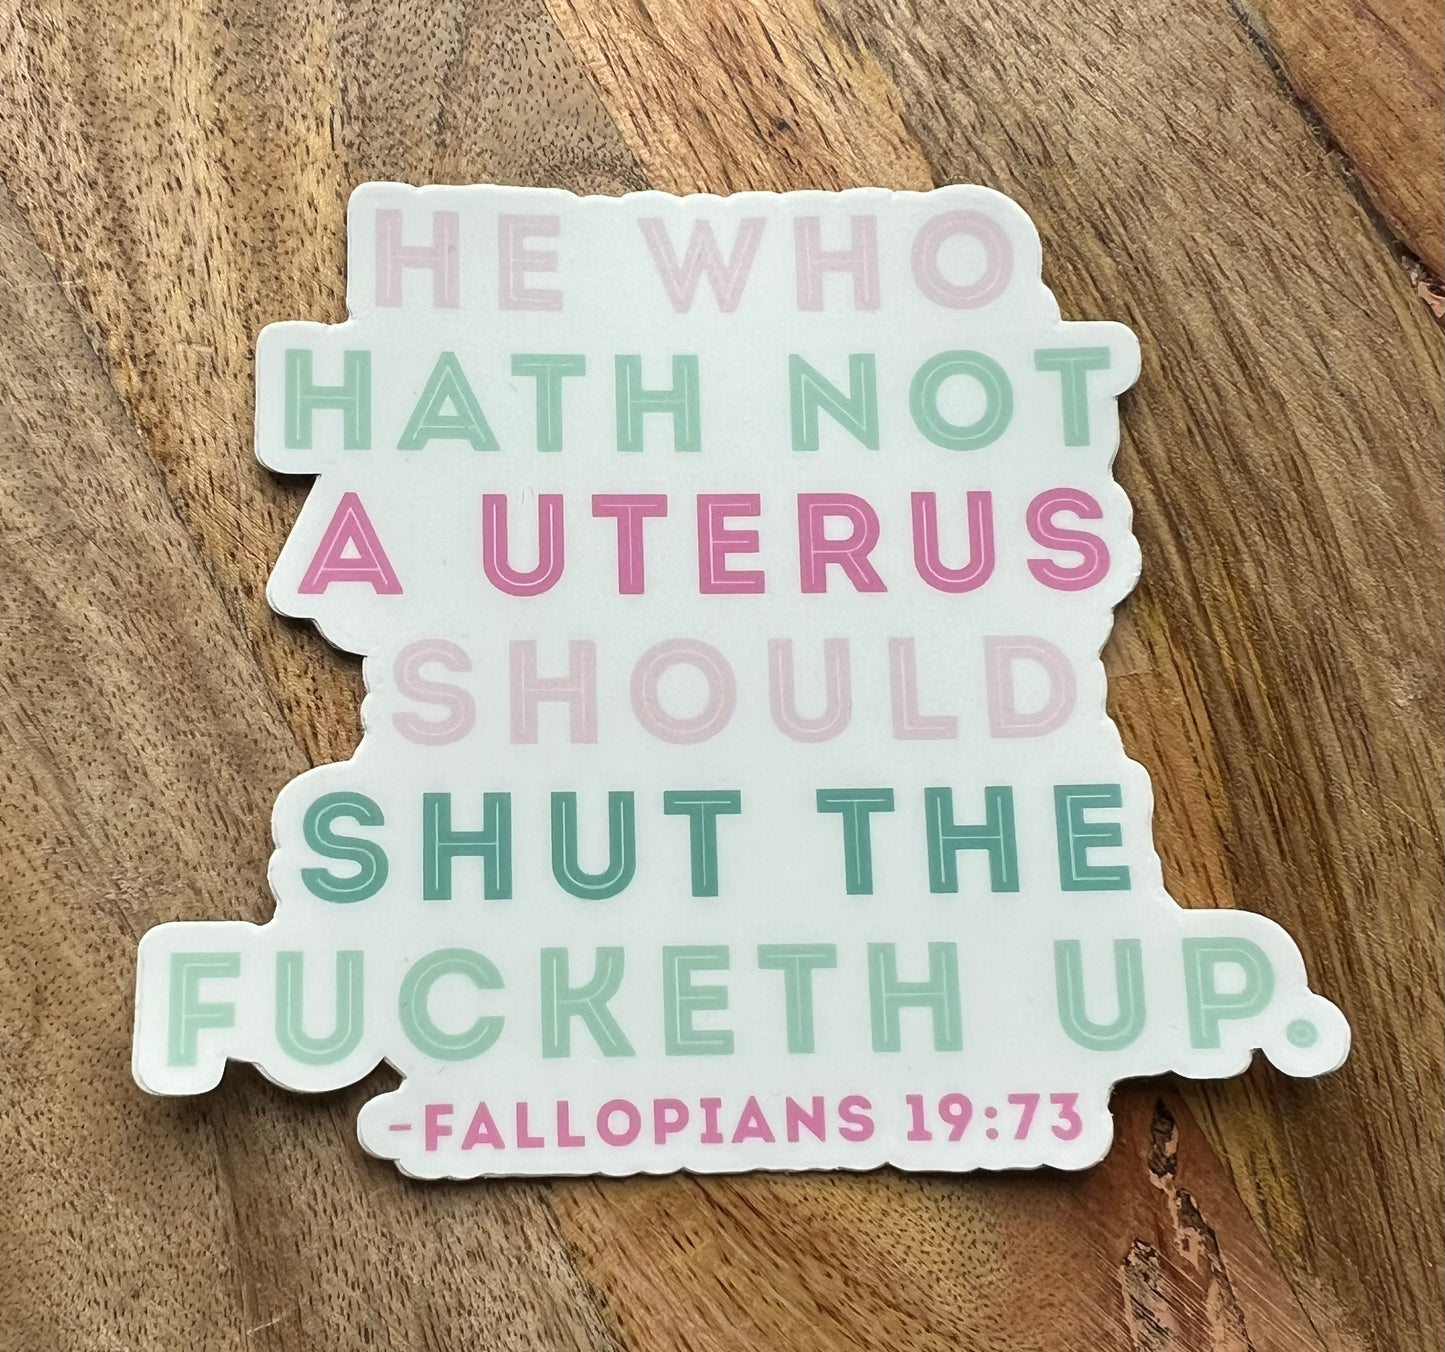 He Who Hath Not A Uterus Should  Shut The Fucketh Up